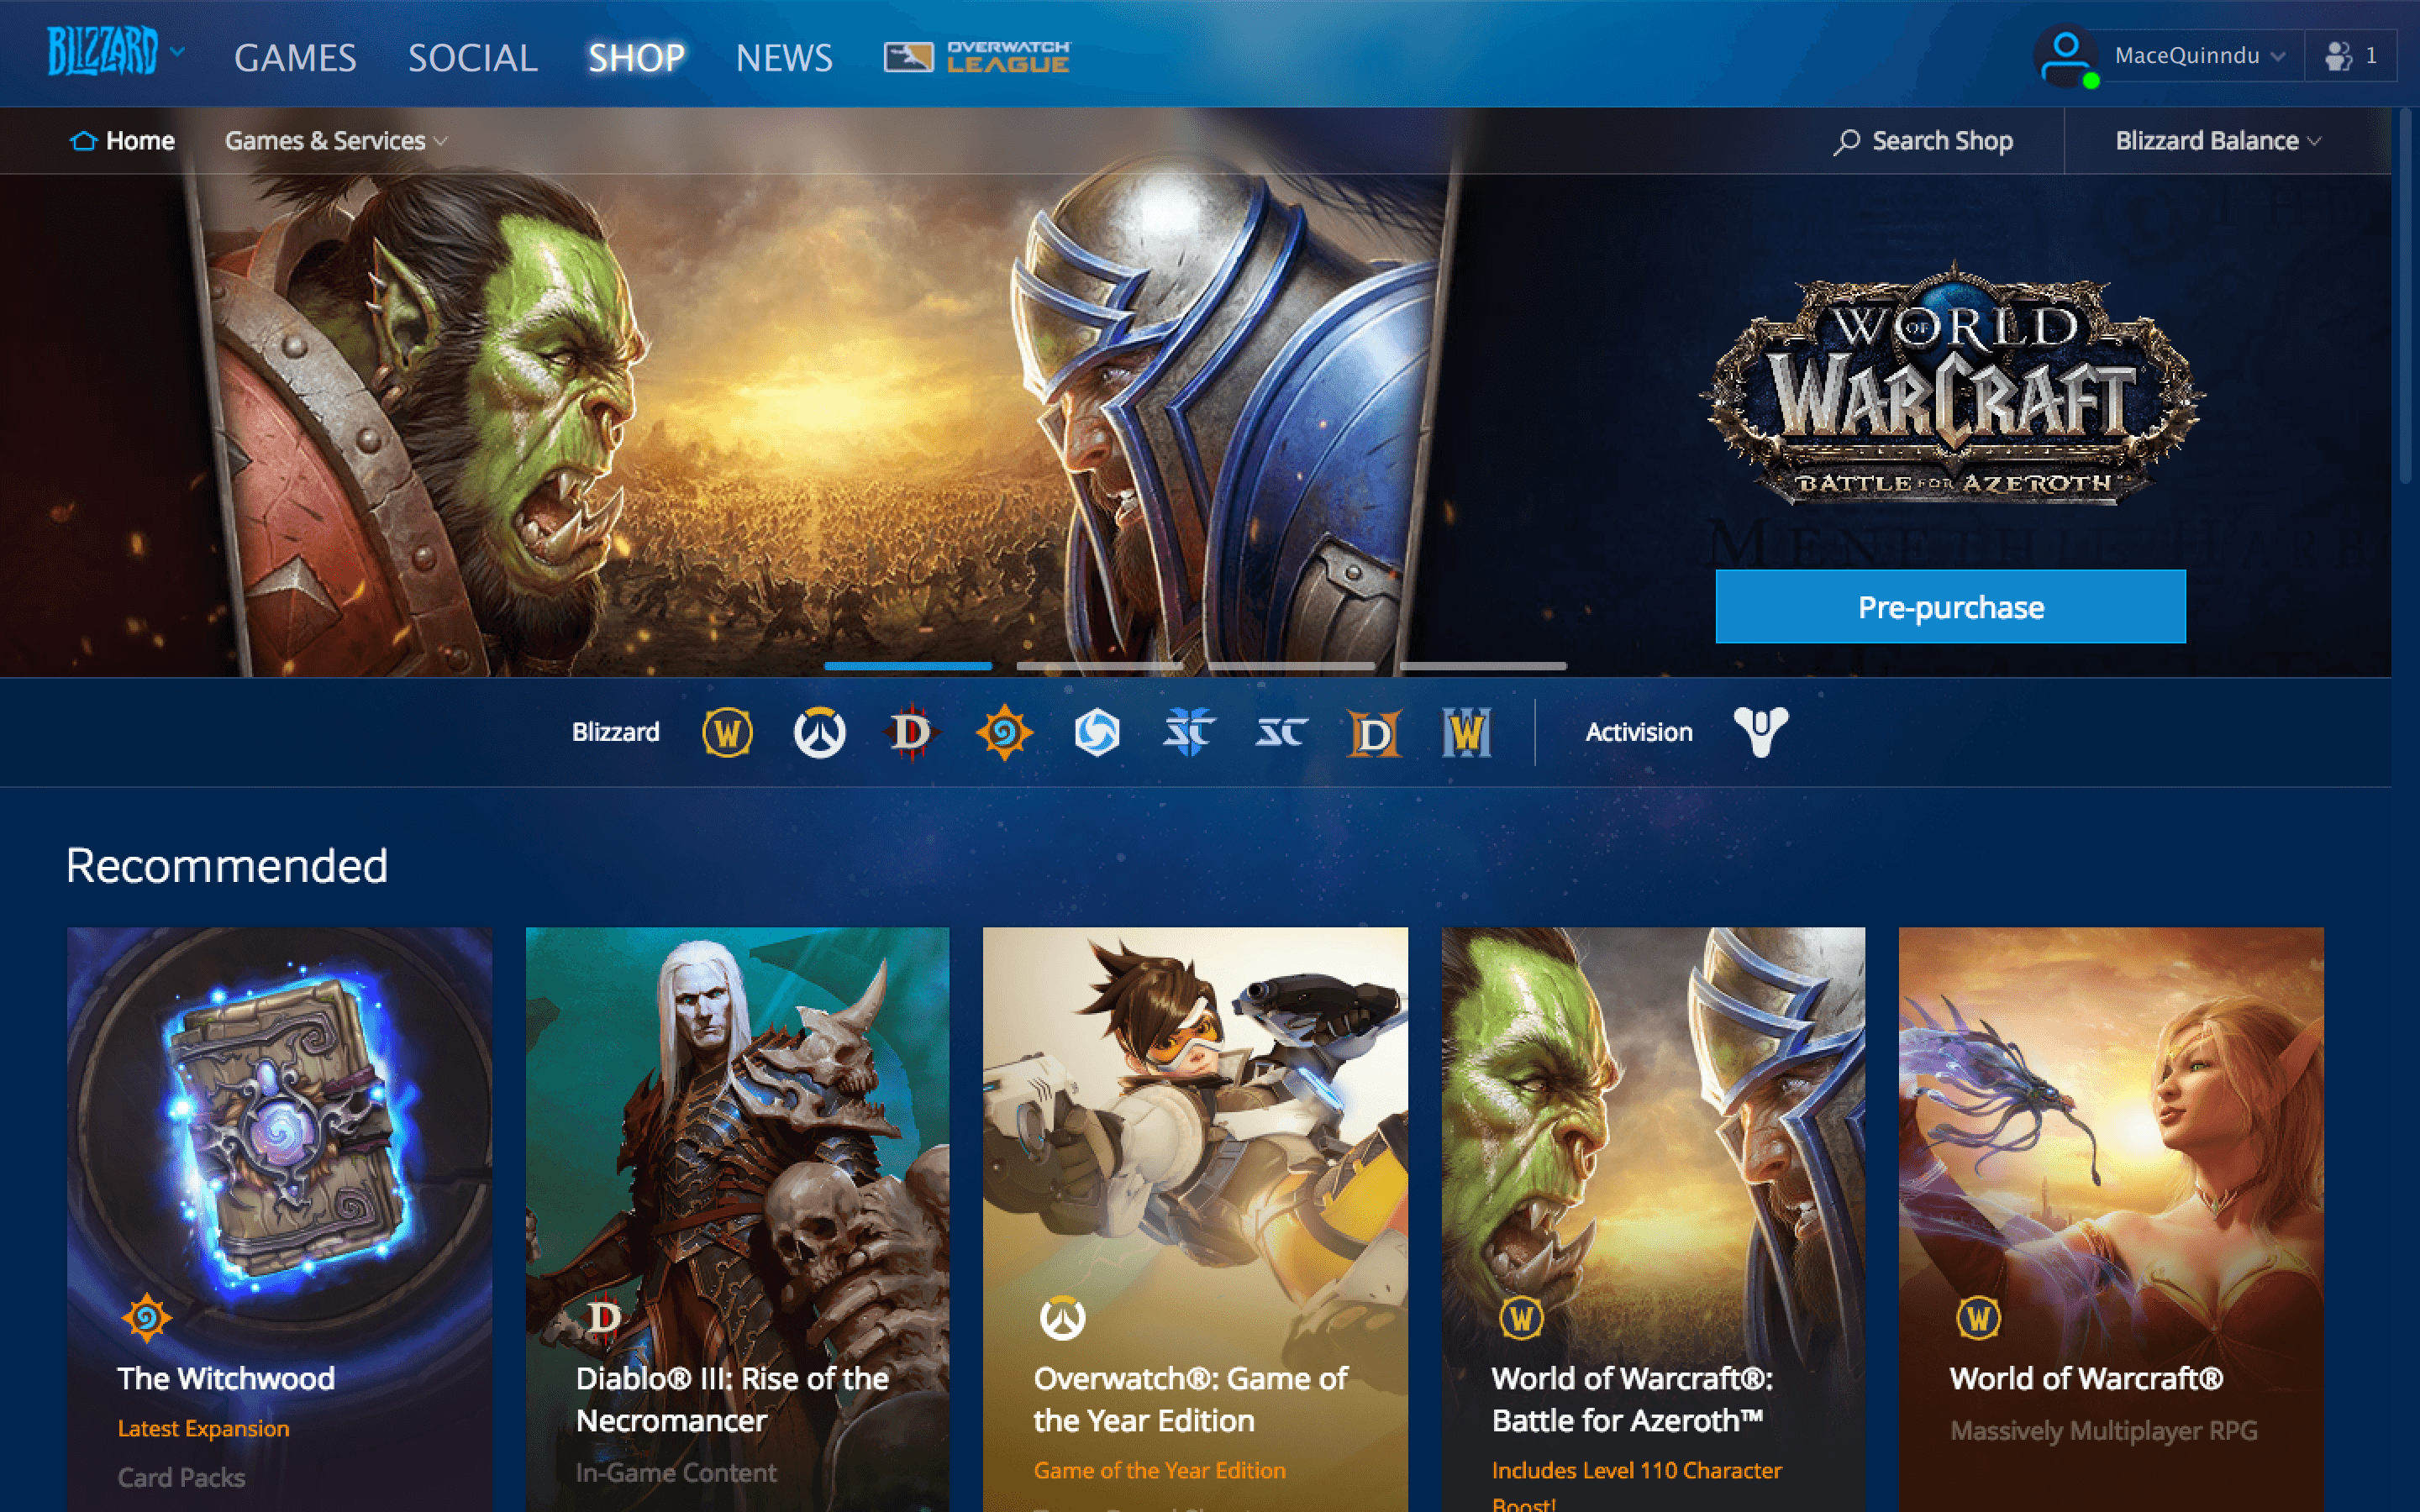 Battle.net It's a Busy Day for Blizzard Services login queue fix -  GameRevolution